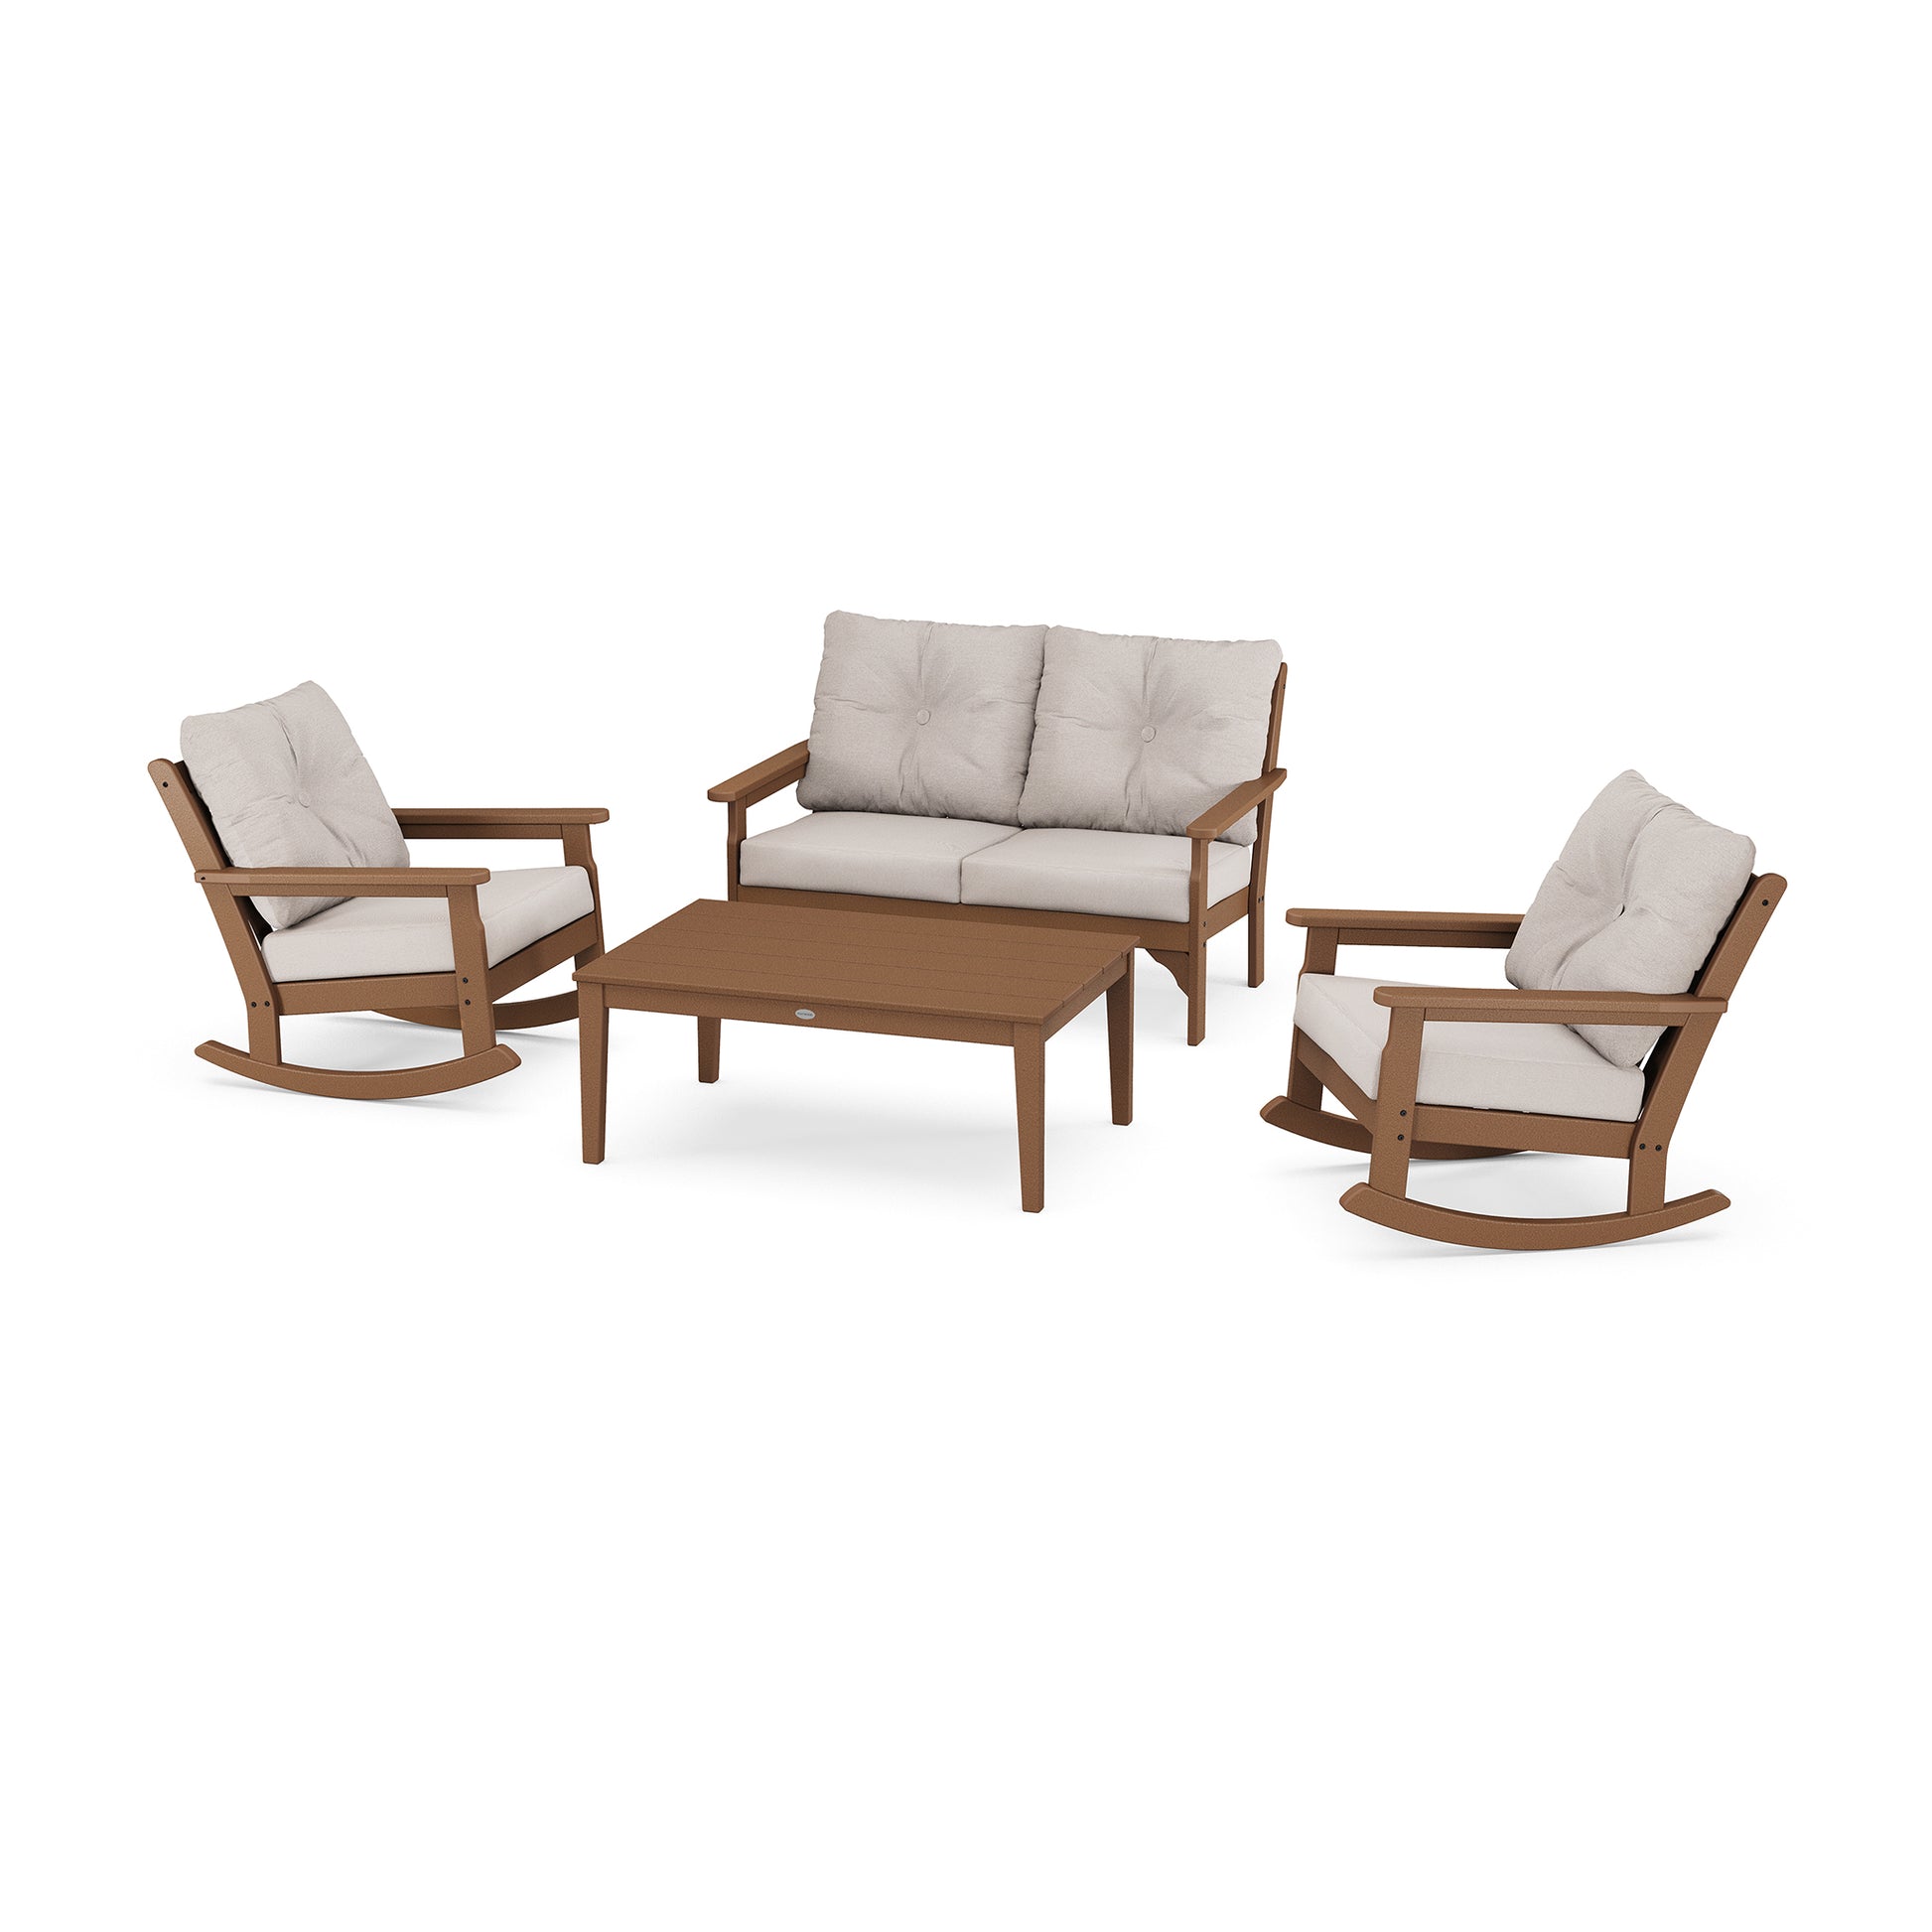 A POLYWOOD Vineyard 4-Piece Deep Seating Rocking Chair Set, including two rocking chairs, a love seat, and a coffee table, all made of POLYWOOD® lumber frames with white cushions. The set is displayed on